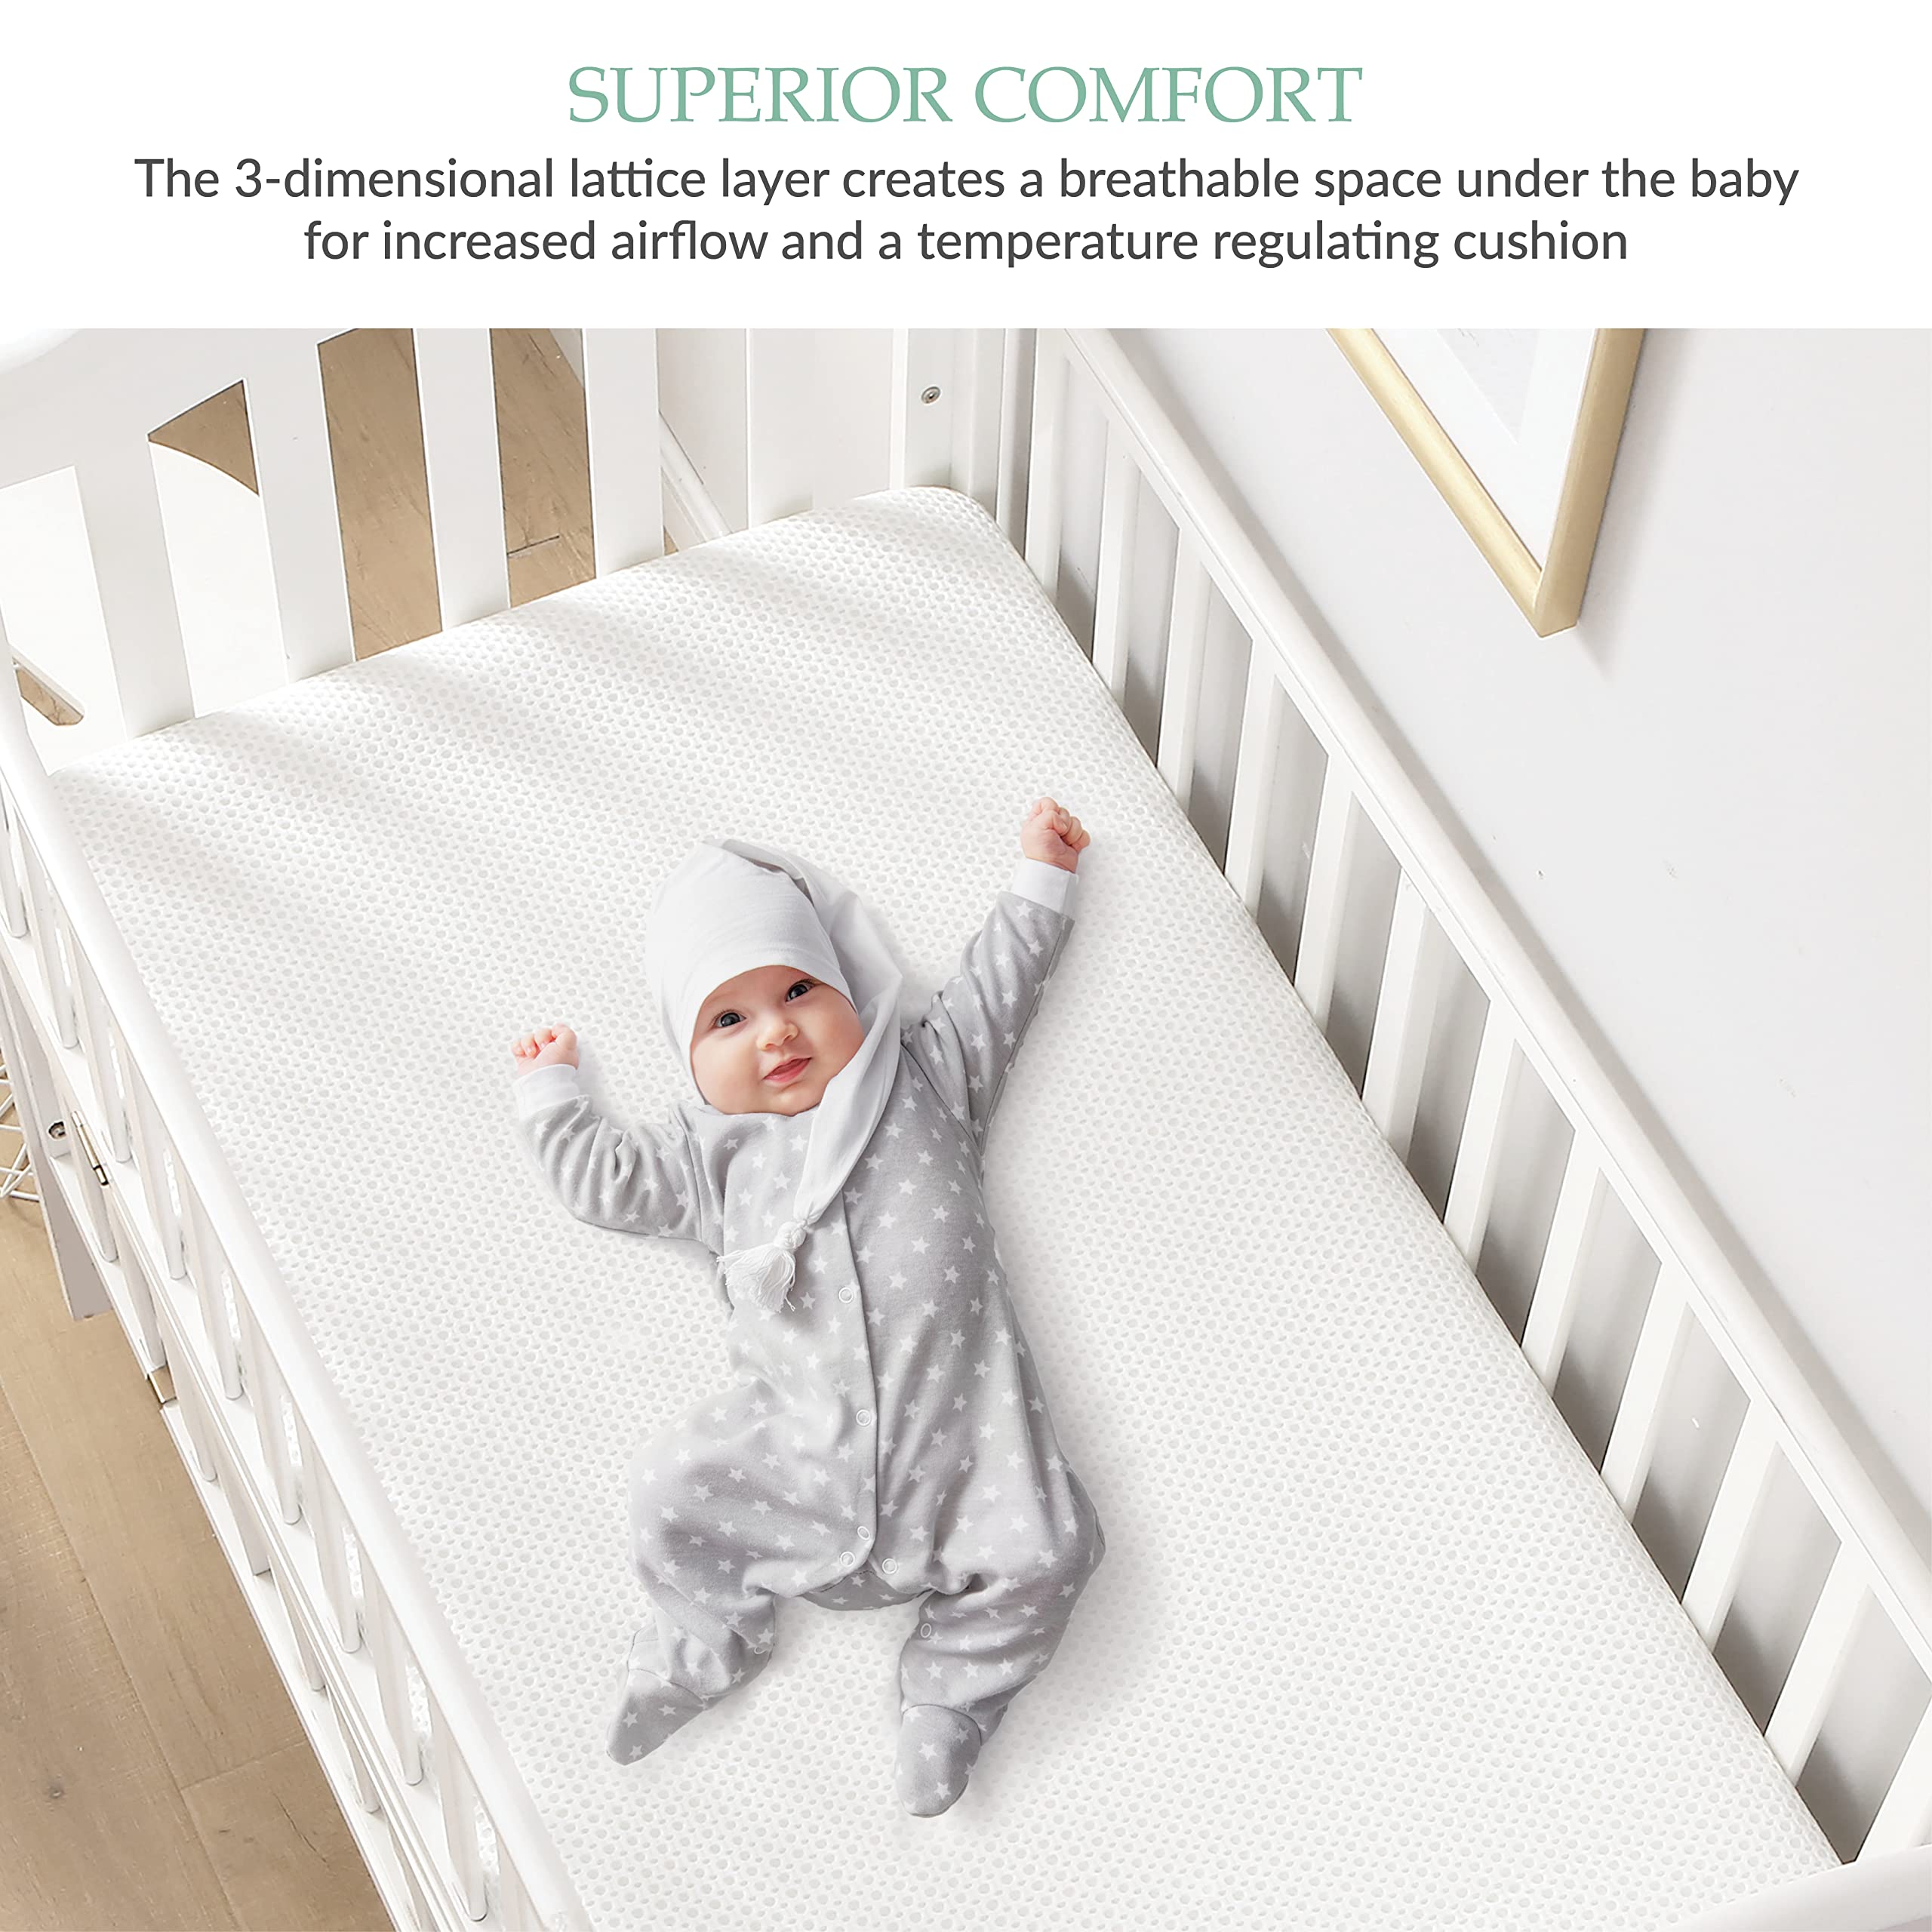 Breathable Mini Crib Waterproof Mattress Protector Pad- Hypoallergenic - Noiseless - Washable- Breath Easy, Babies and Toddlers, Lab Tested - Mini Crib Size 24"X38" by Slumberfy